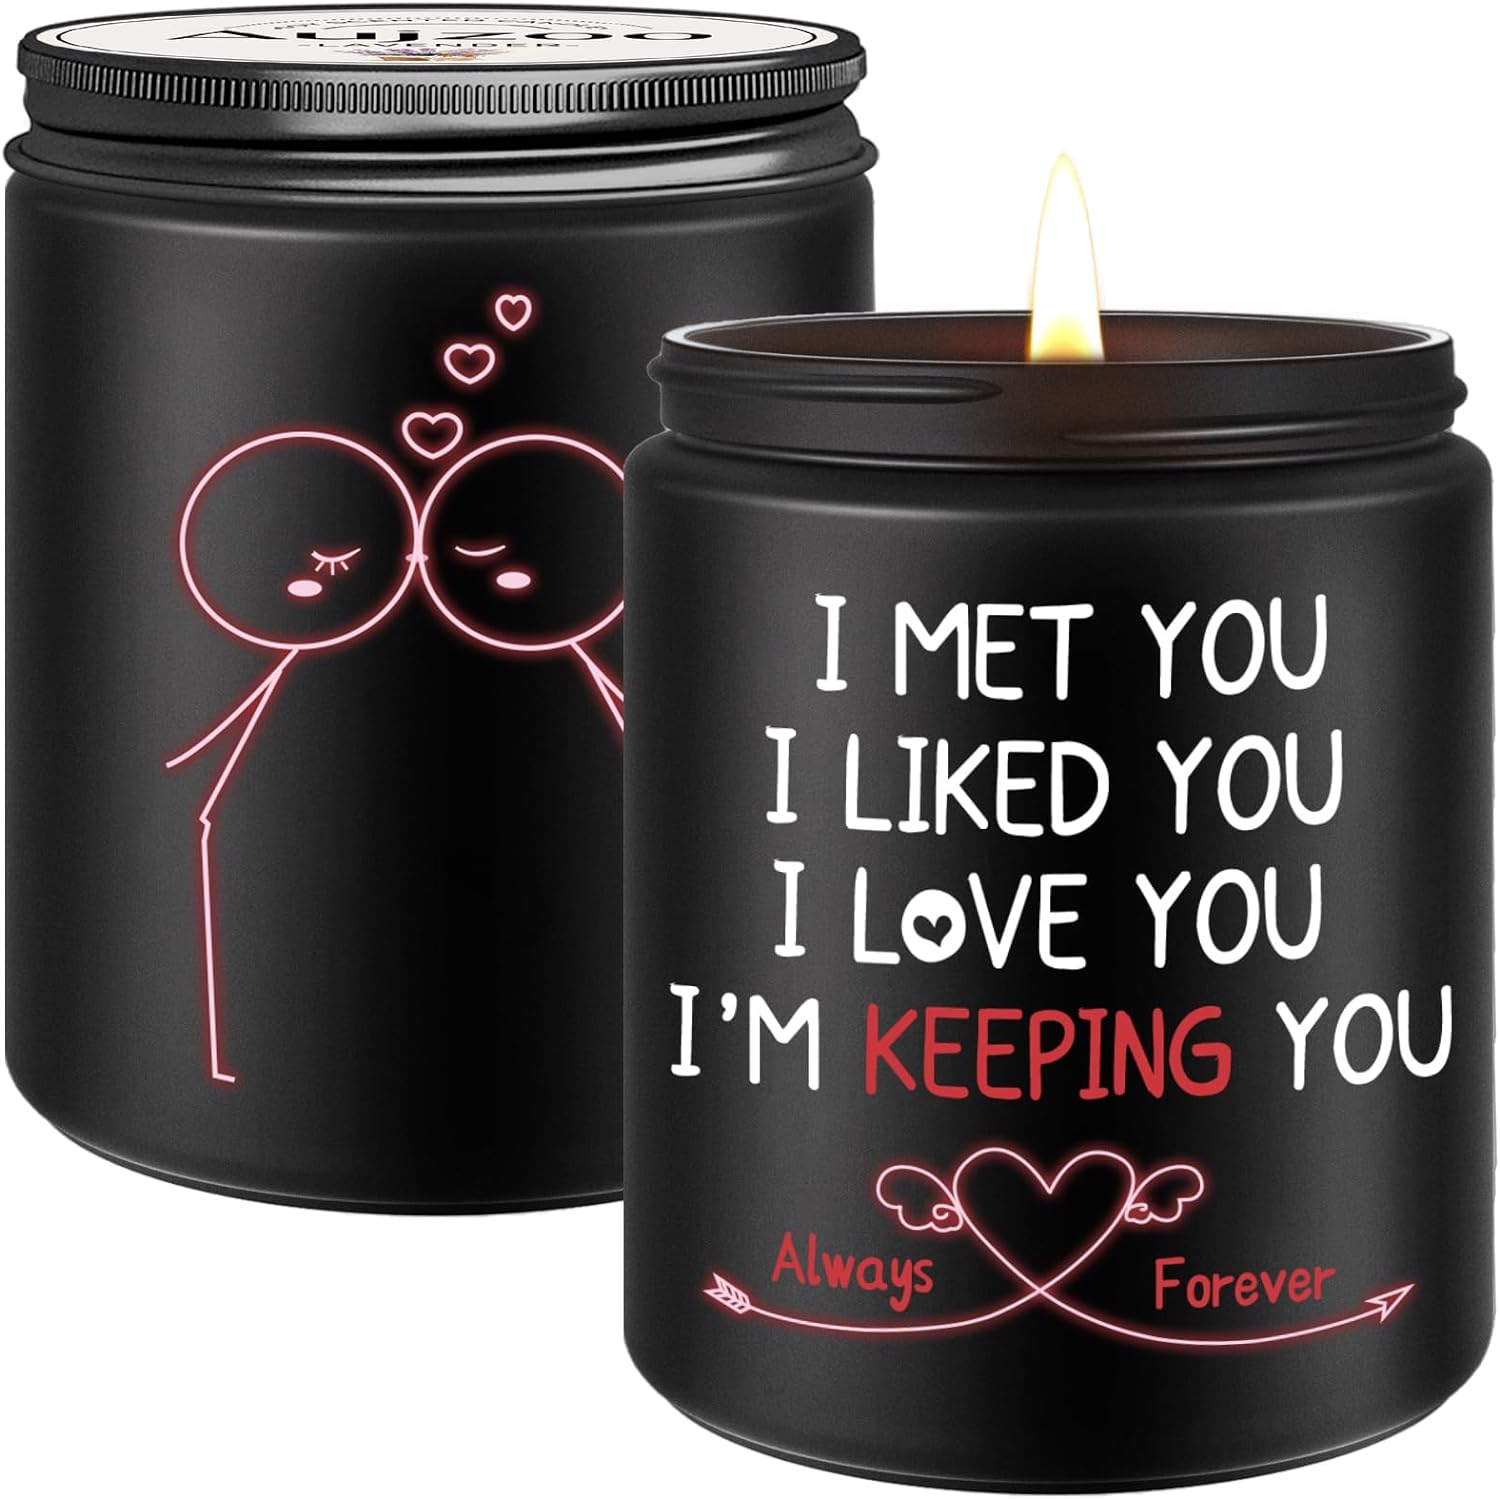 Couple Gifts Valentines Day Gifts for Boyfriend, Girlfriend, Him, Her, Wife,Husband, Romantic Gifts for Anniversary Birthday Christmas Gifts Lavender Scented Candle